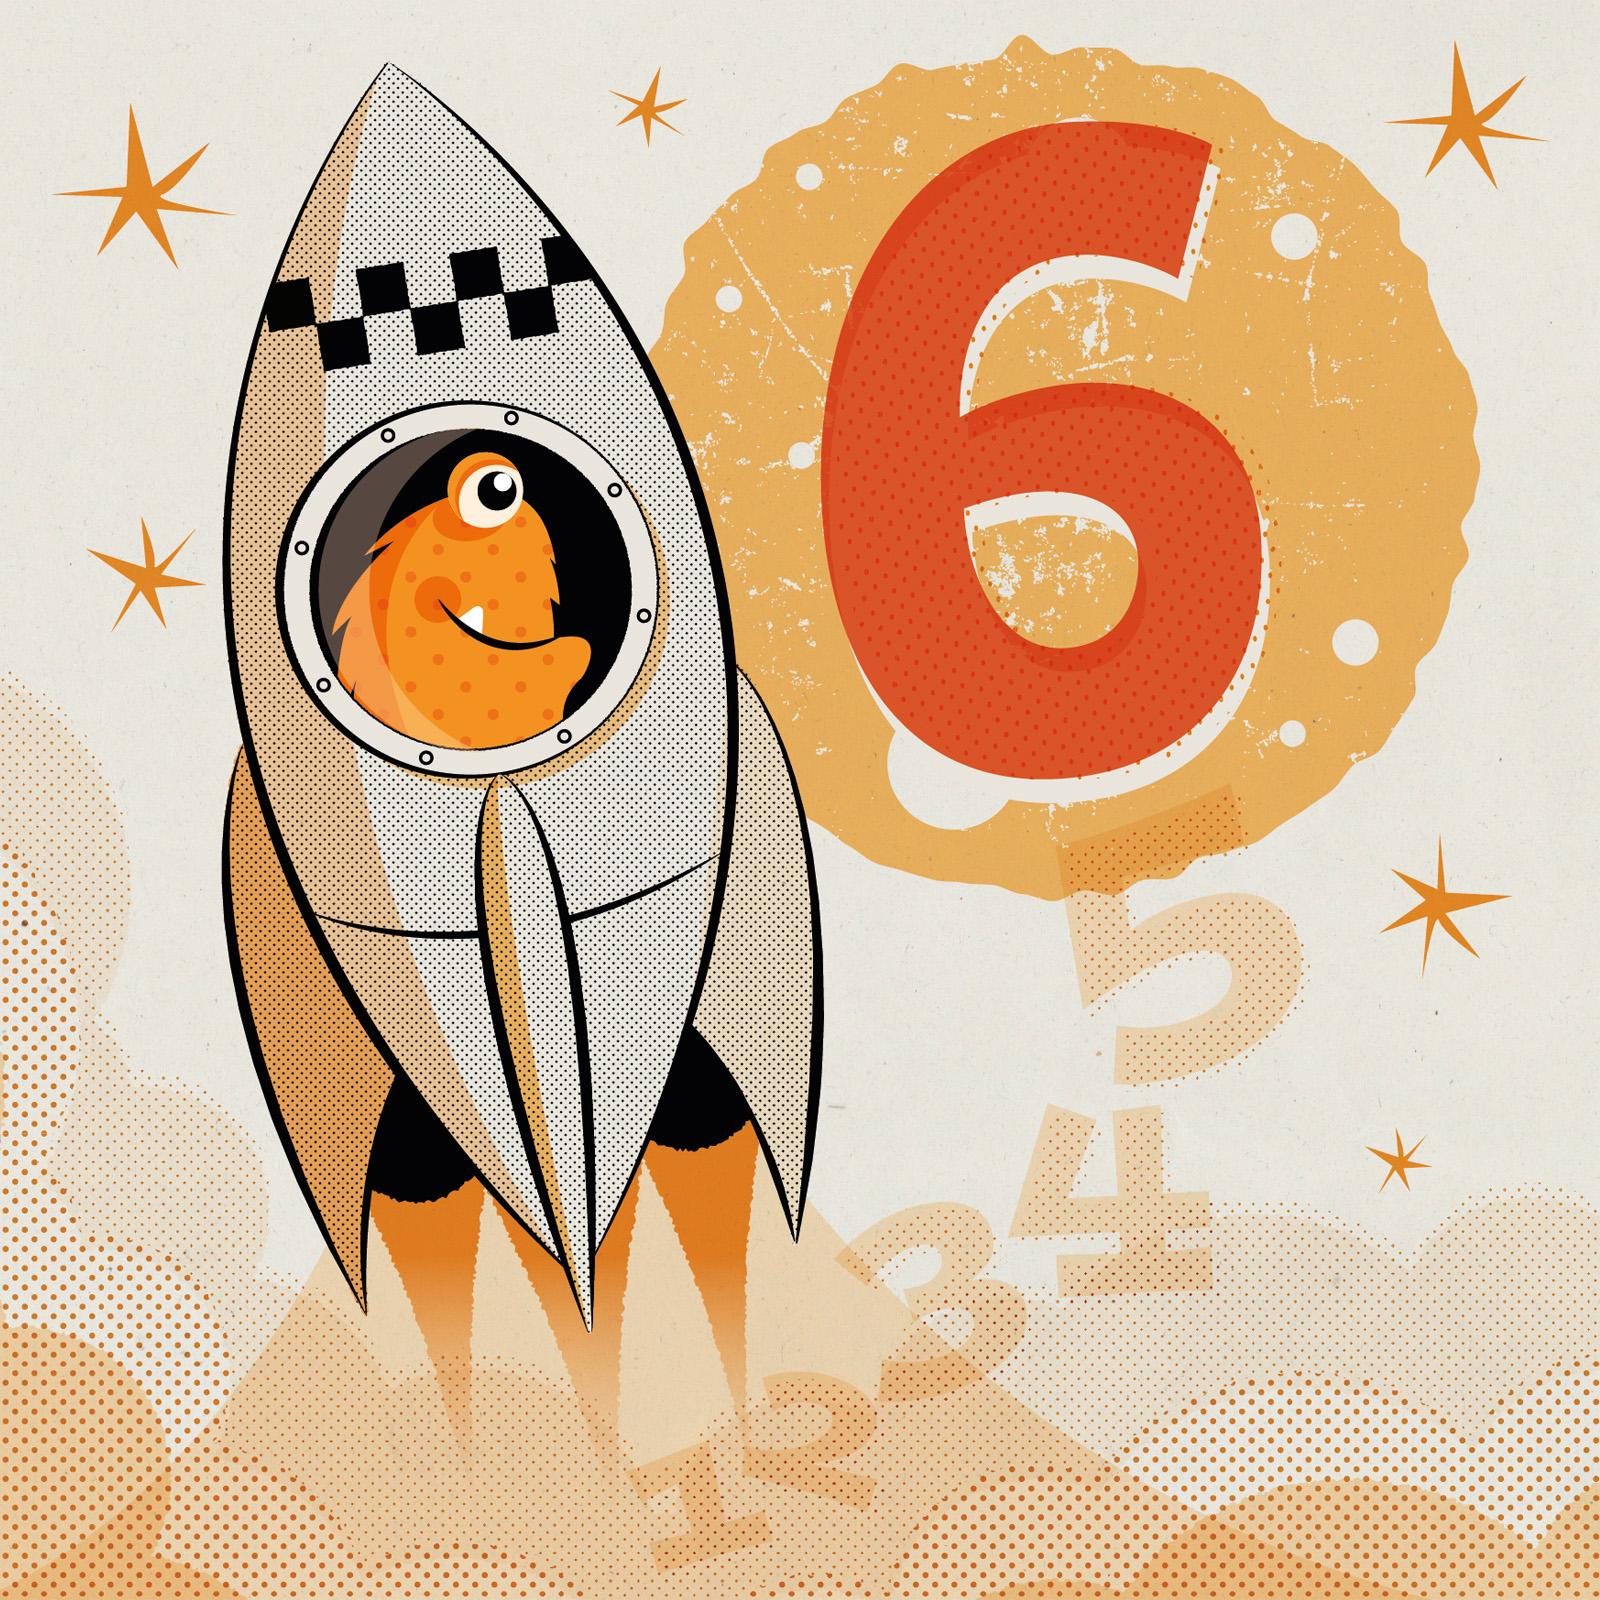 orange furry alien blasting off in a grey retro 50s style rocket behind is an orange number 6 planet with a launch countdown underneath in pale orange